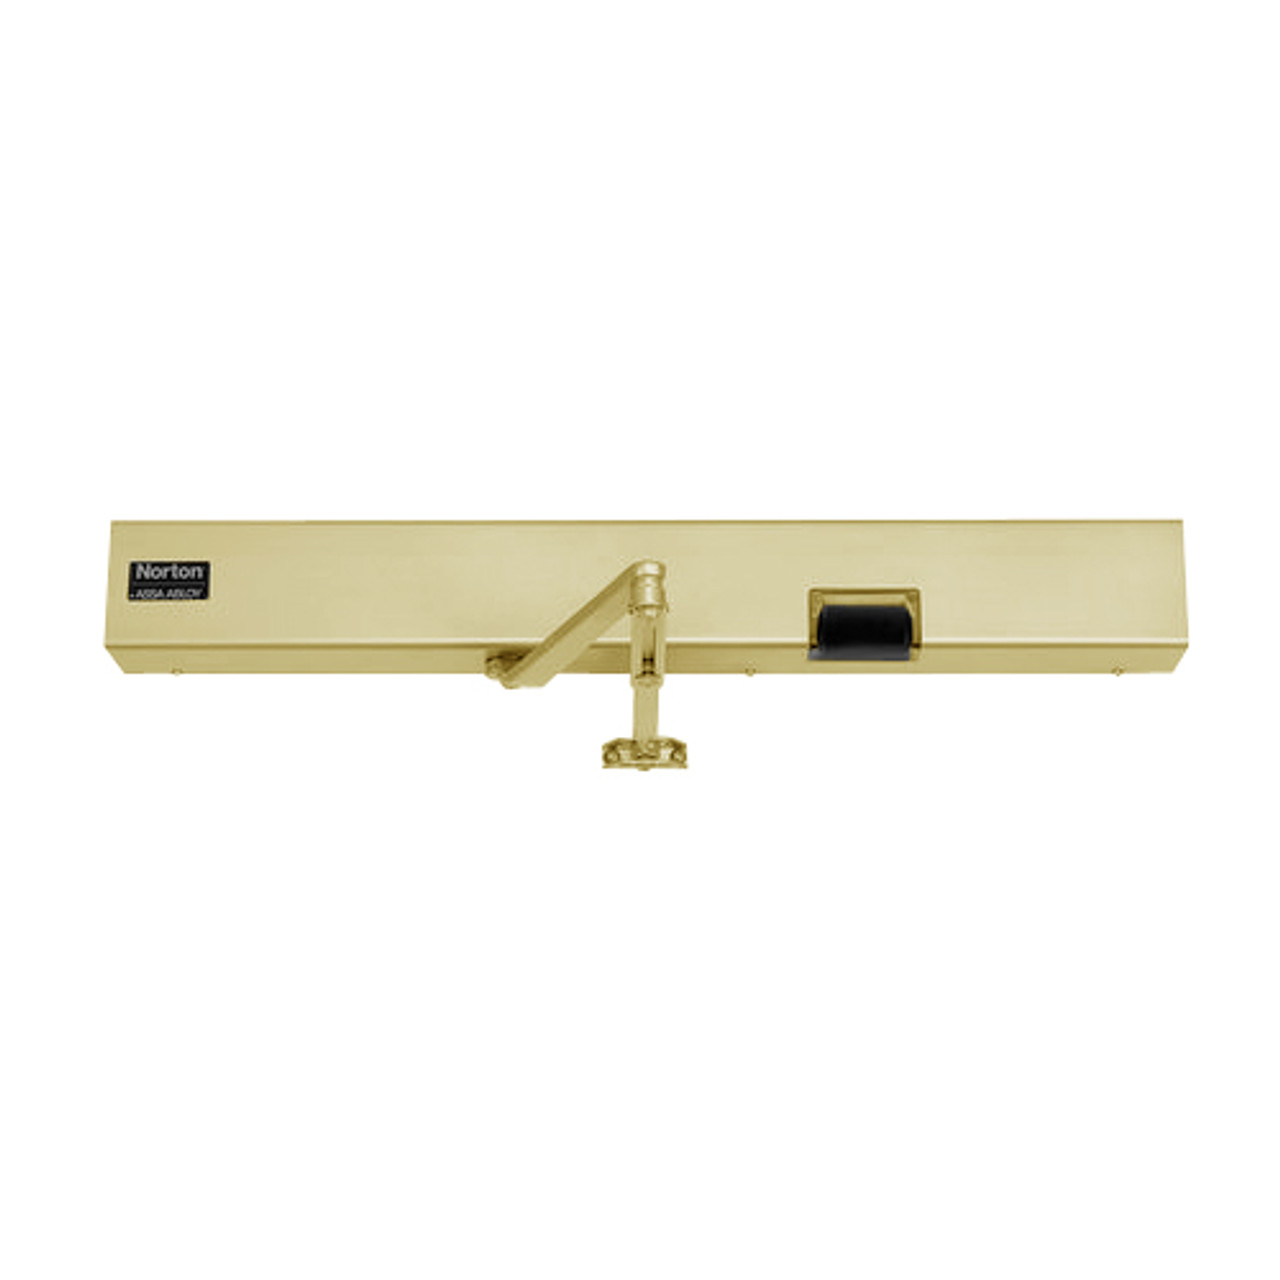 7124SZ-LH-120VAC-696 Norton 7100SZ Series Safe Zone Multi-Point Closer/Holder with Motion Sensor and Push Side Double Lever 11 inch Main Arm in Gold Finish